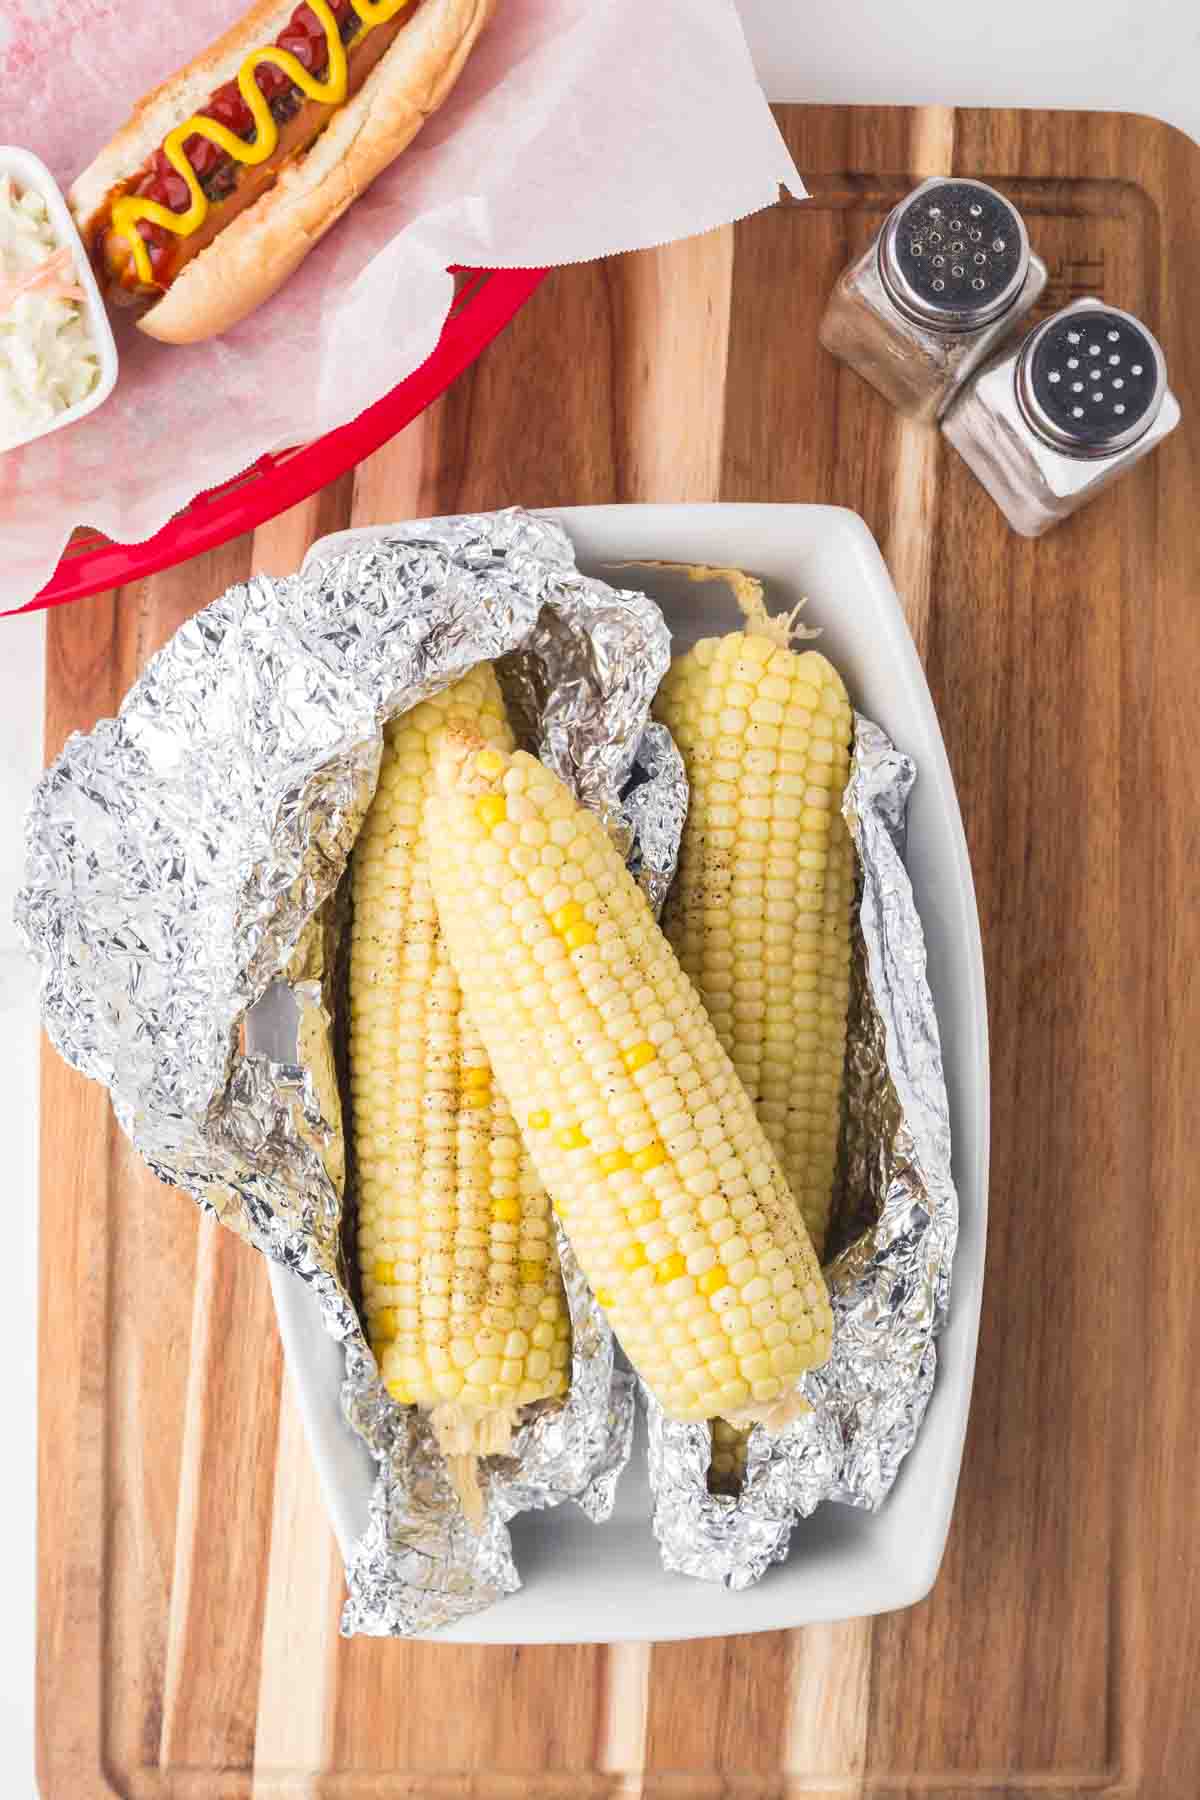 three pieces of corn on the cob wrapped in foil laying on a wooden board then the foil is opened